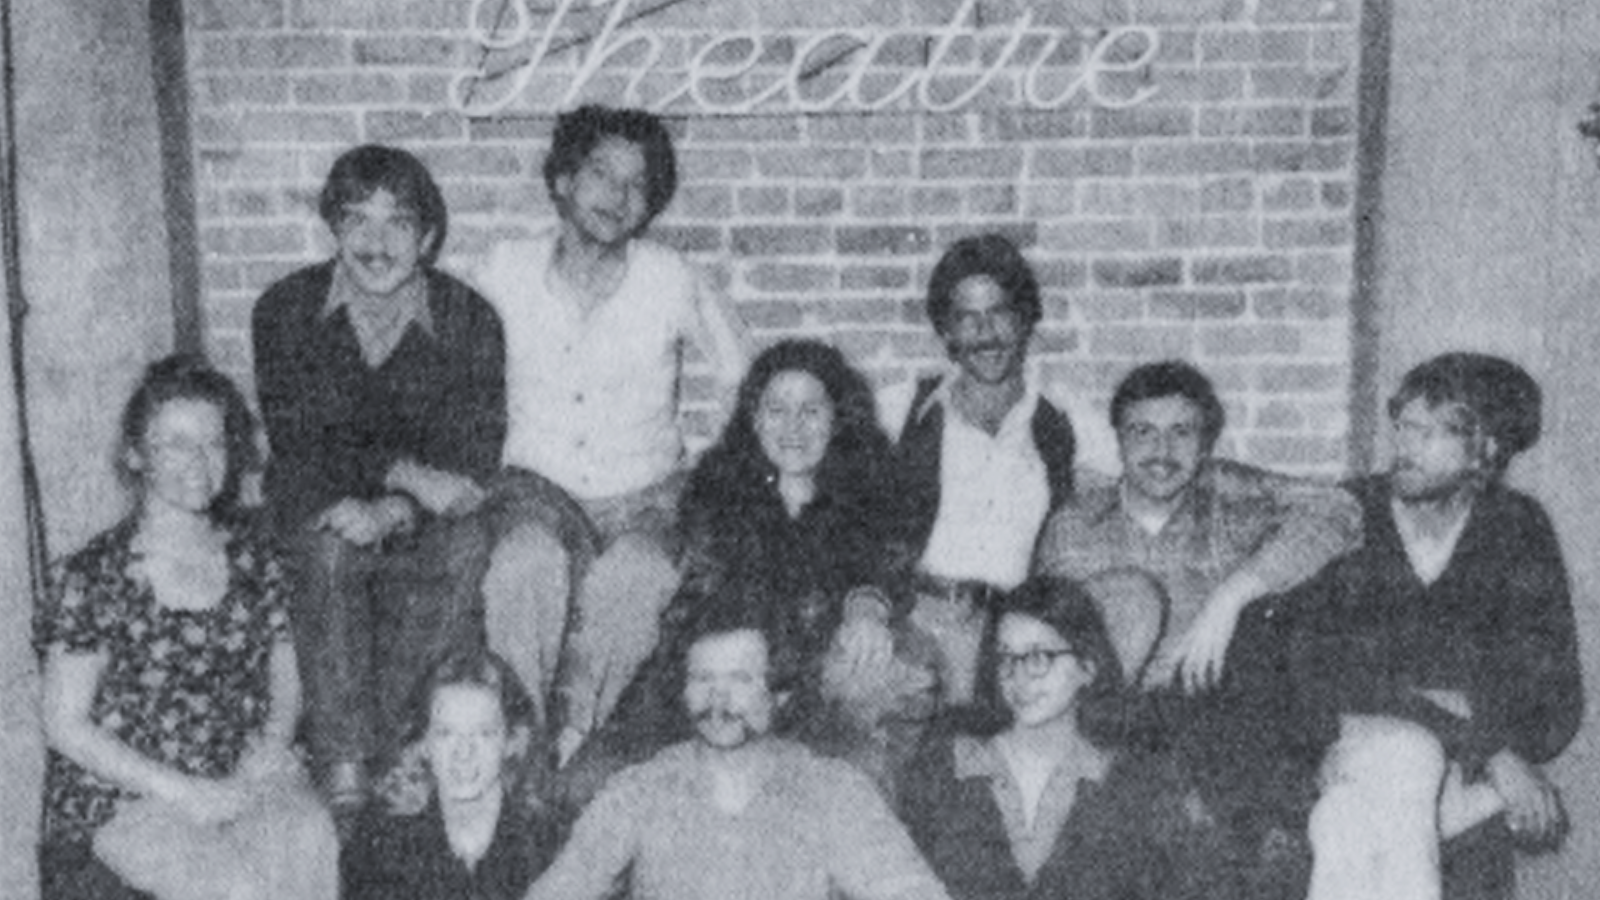 Moore Egyptian staff photo featuring festival founders, Darryl Macdonald (second from left) and Dan Ireland (third from right)